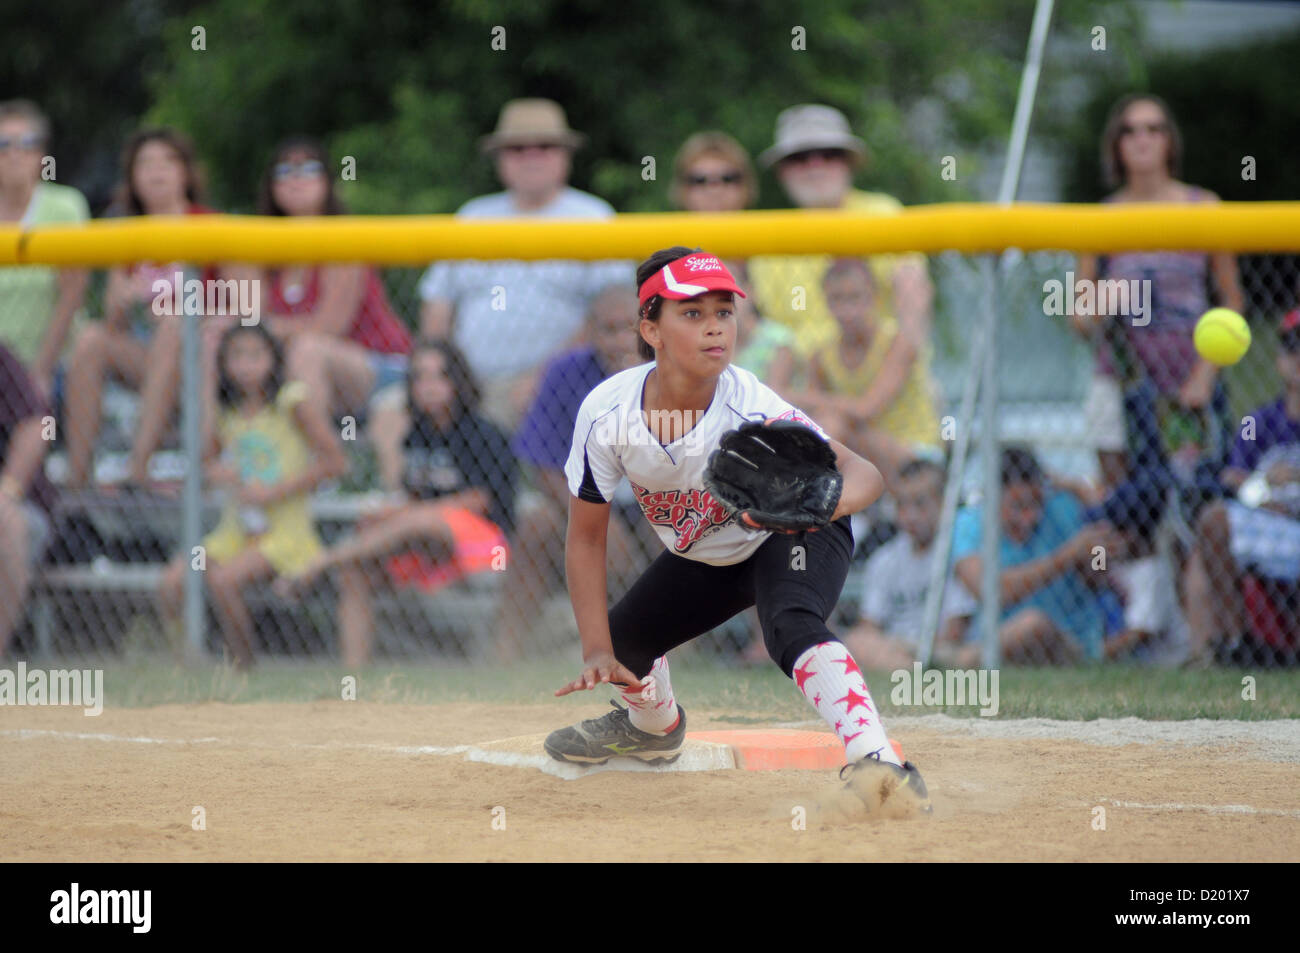 Softball First baseman stretches for a throw to retire an opposing hitter during a Little League-sanctioned game in South Elgin, Illinois, USA. Stock Photo